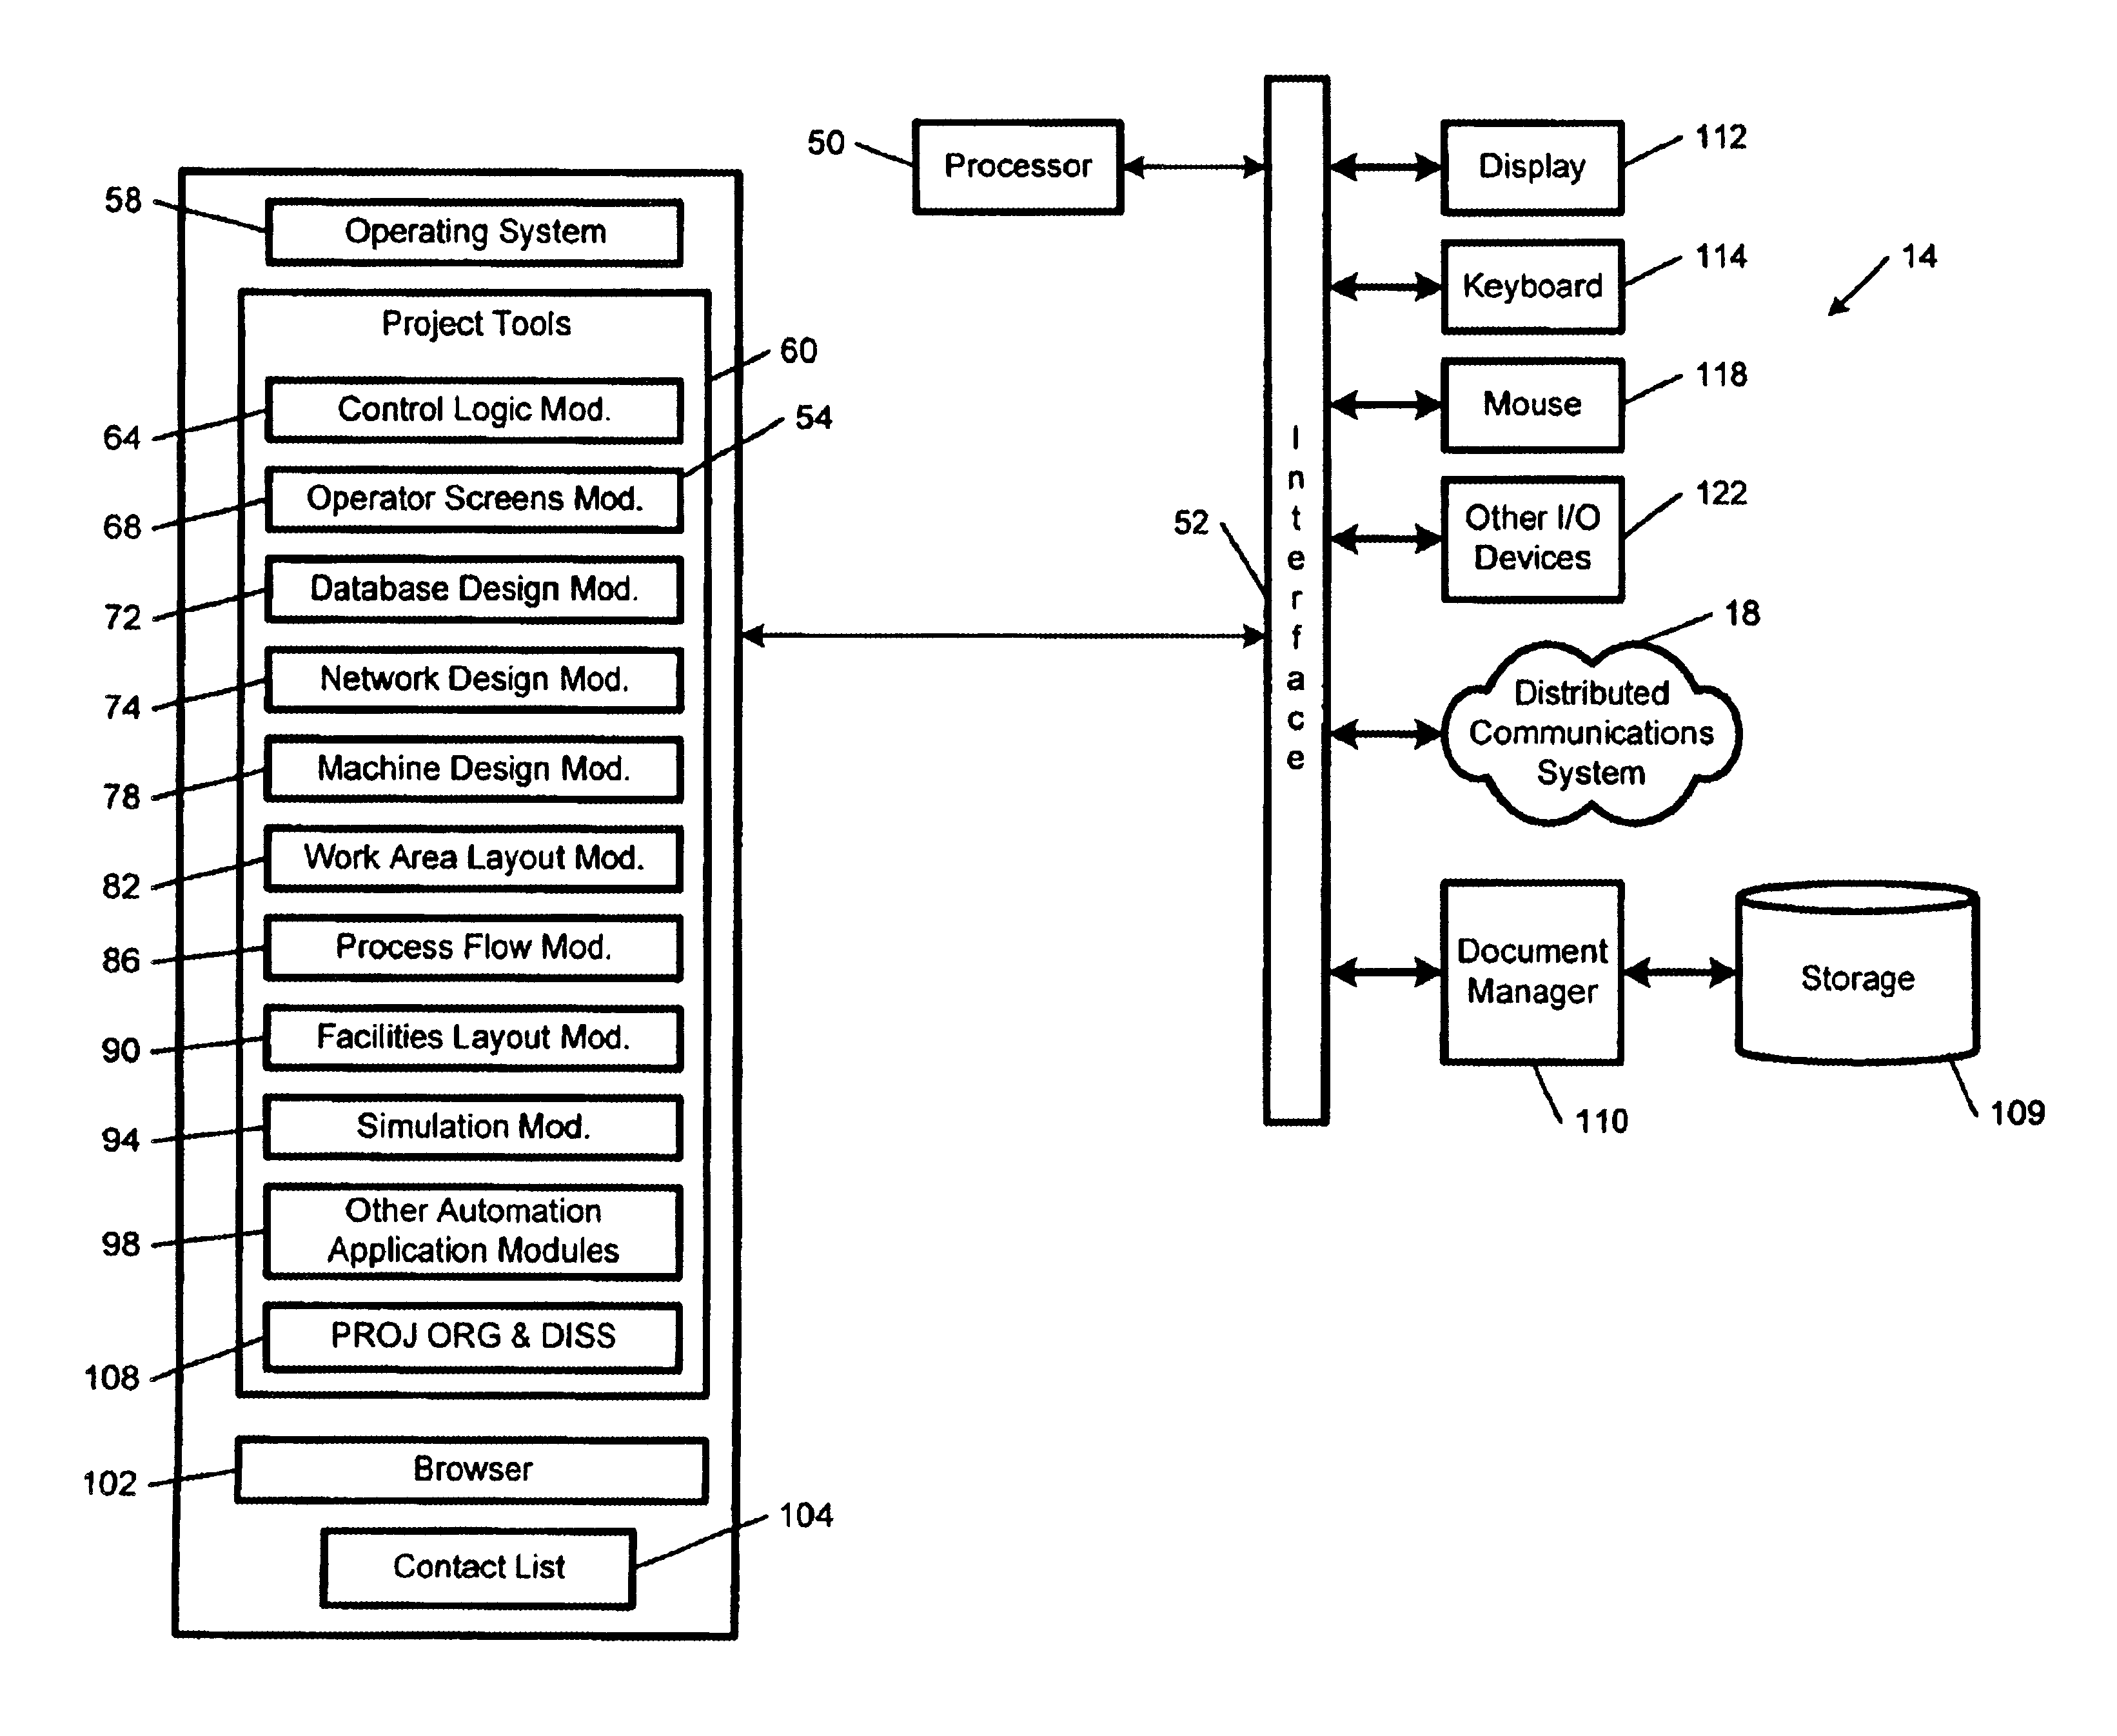 Project organization and dissemination system for machine programming and control systems